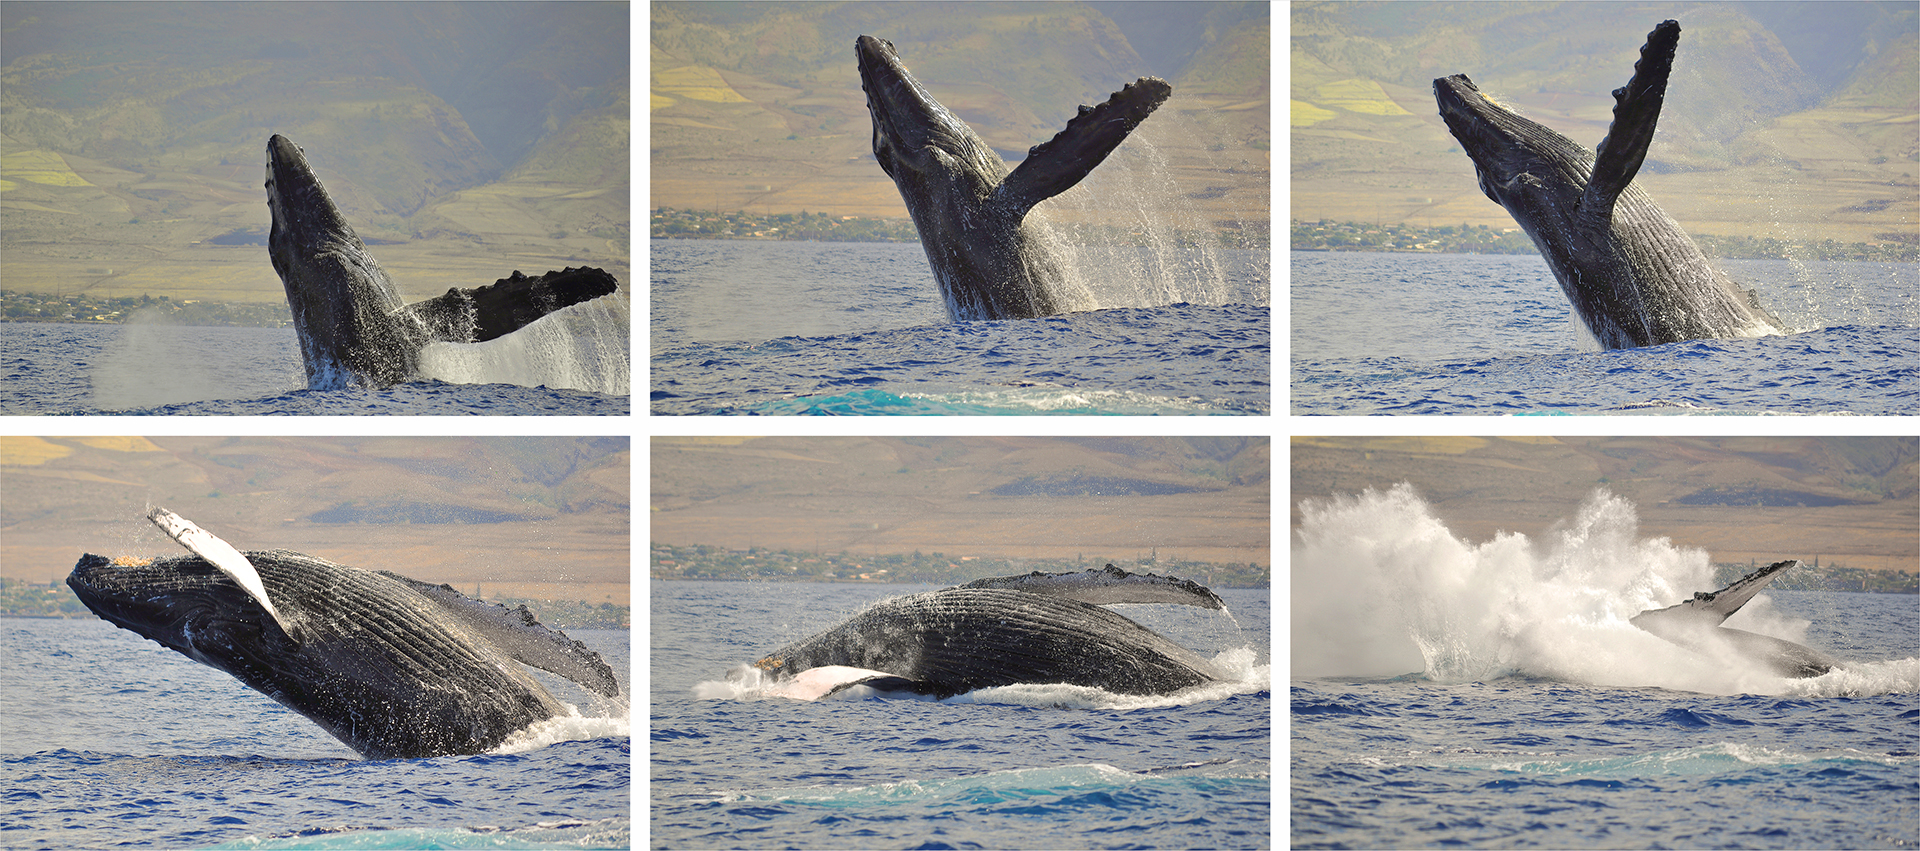 Sequence of Whale Breaching in Maui Hawaii